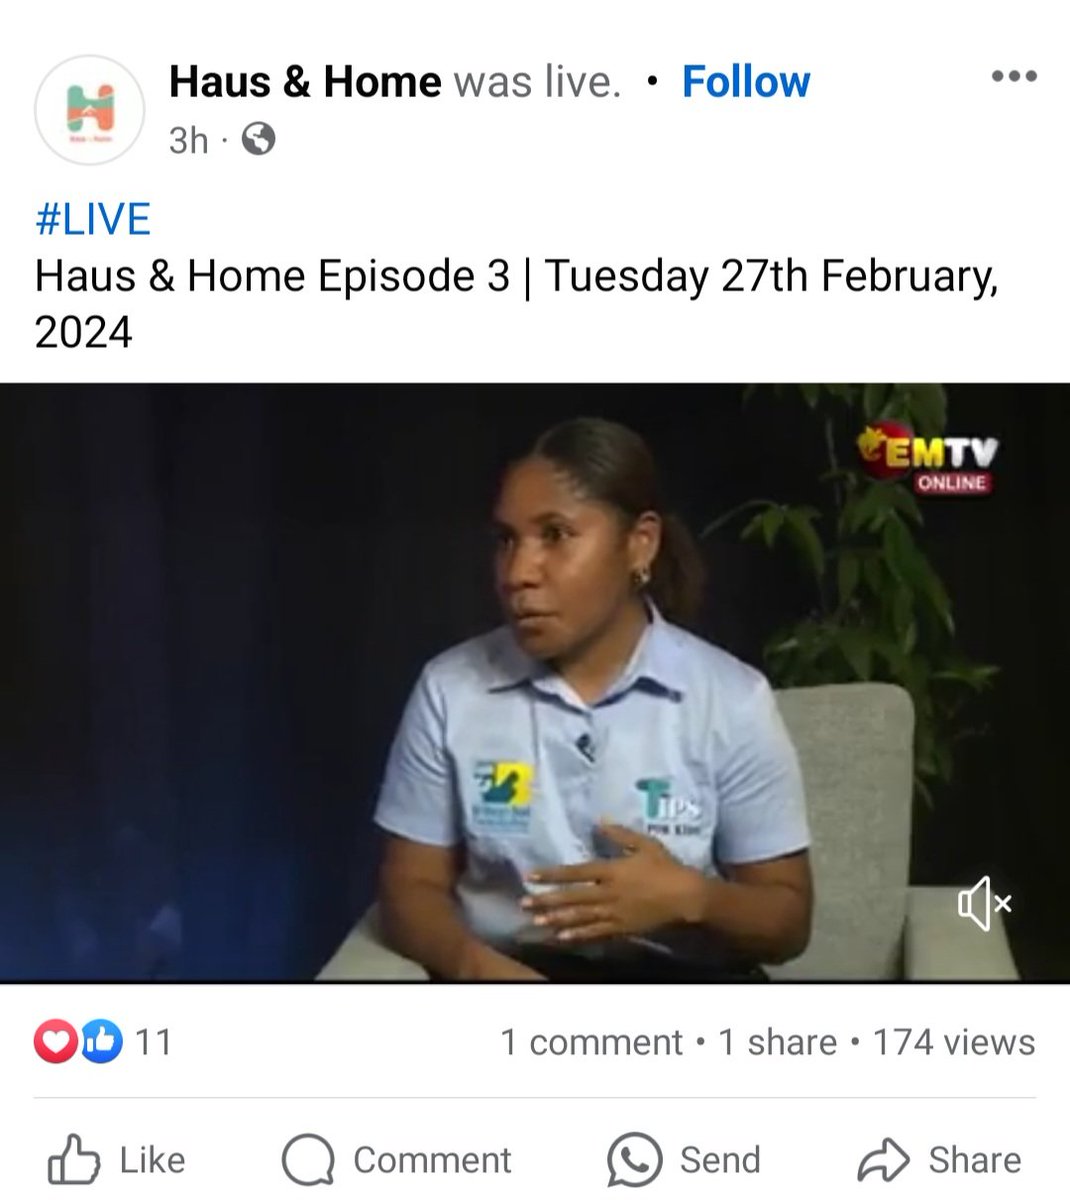 Thank you @EMTVOnline for hosting us on your Haus & Home show.